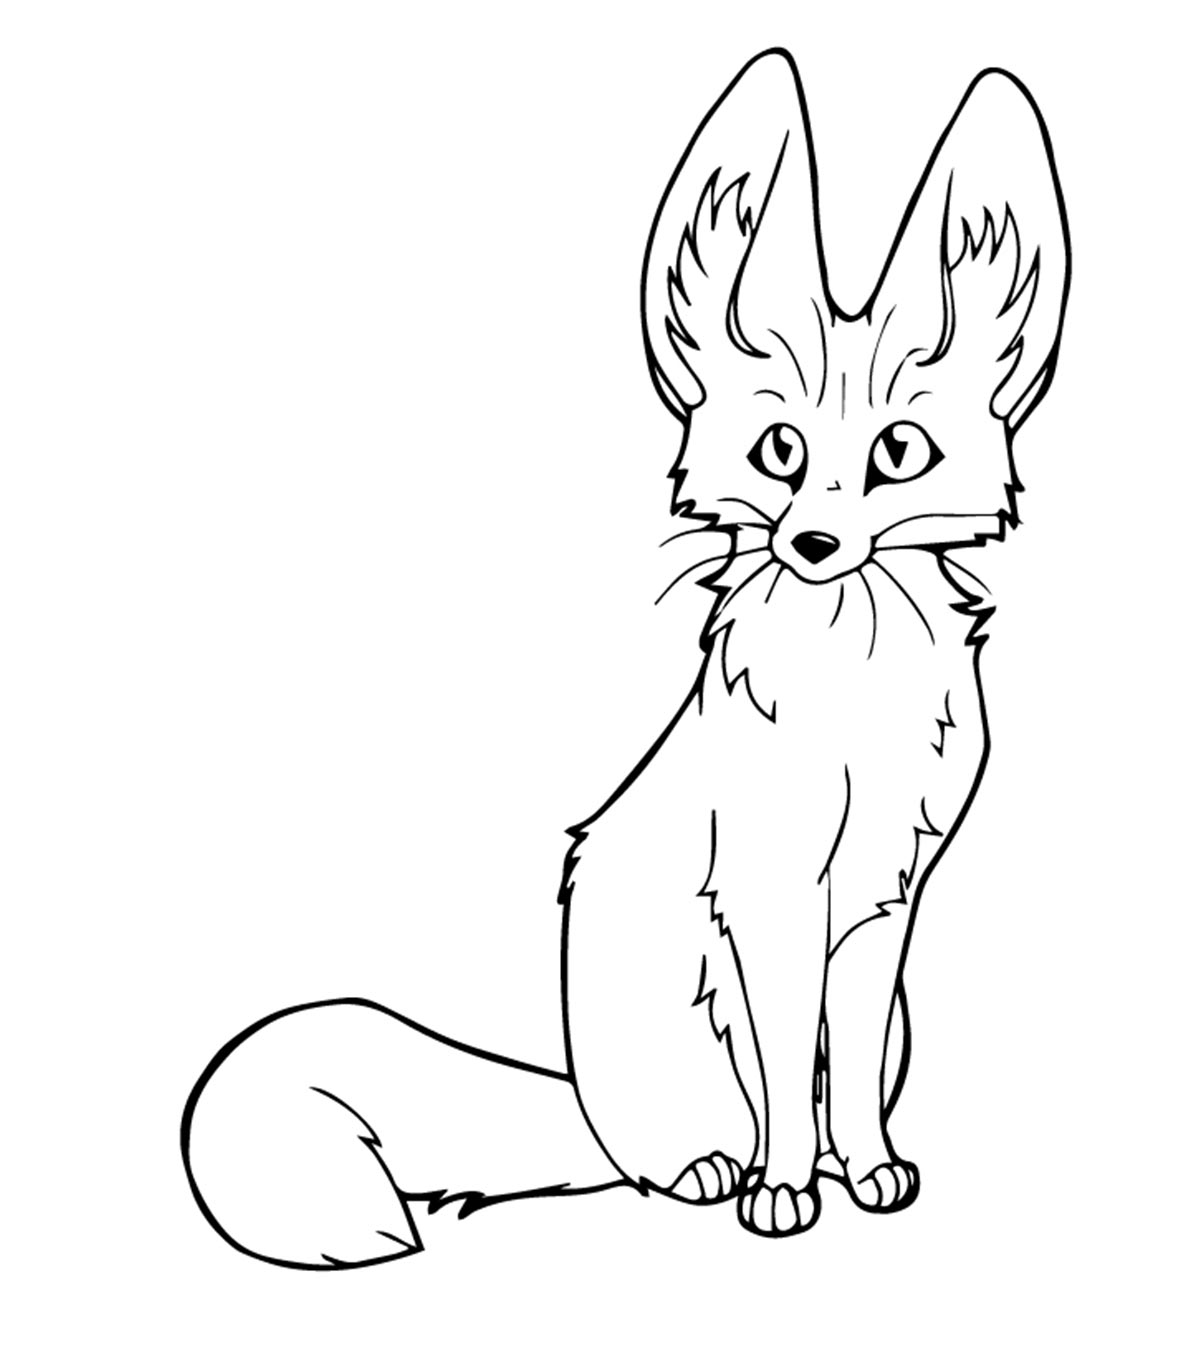 25 Interesting Fox Coloring Pages Your Toddler Will Love